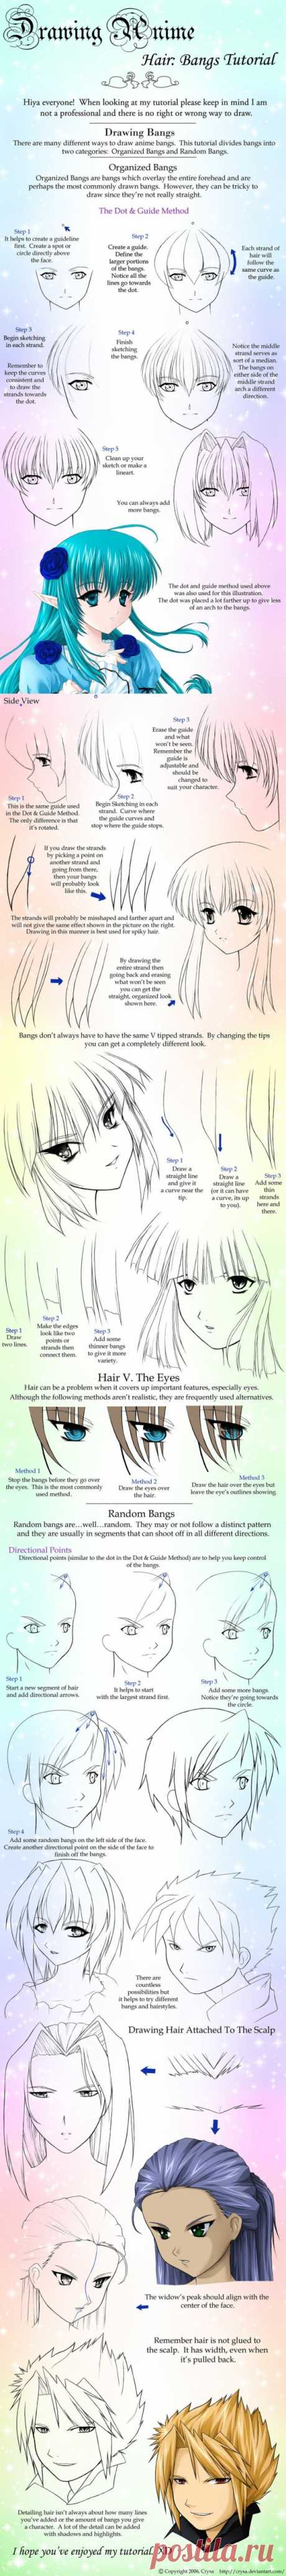 How to draw Manga Hair Drawing Hair Bangs Tut, Anime Hair Tutorial, Page 8 by ~Tentopet on deviantART, how to draw anime hair, cute, kawaii anime people , hairstyles drawing, Japanese anime tut